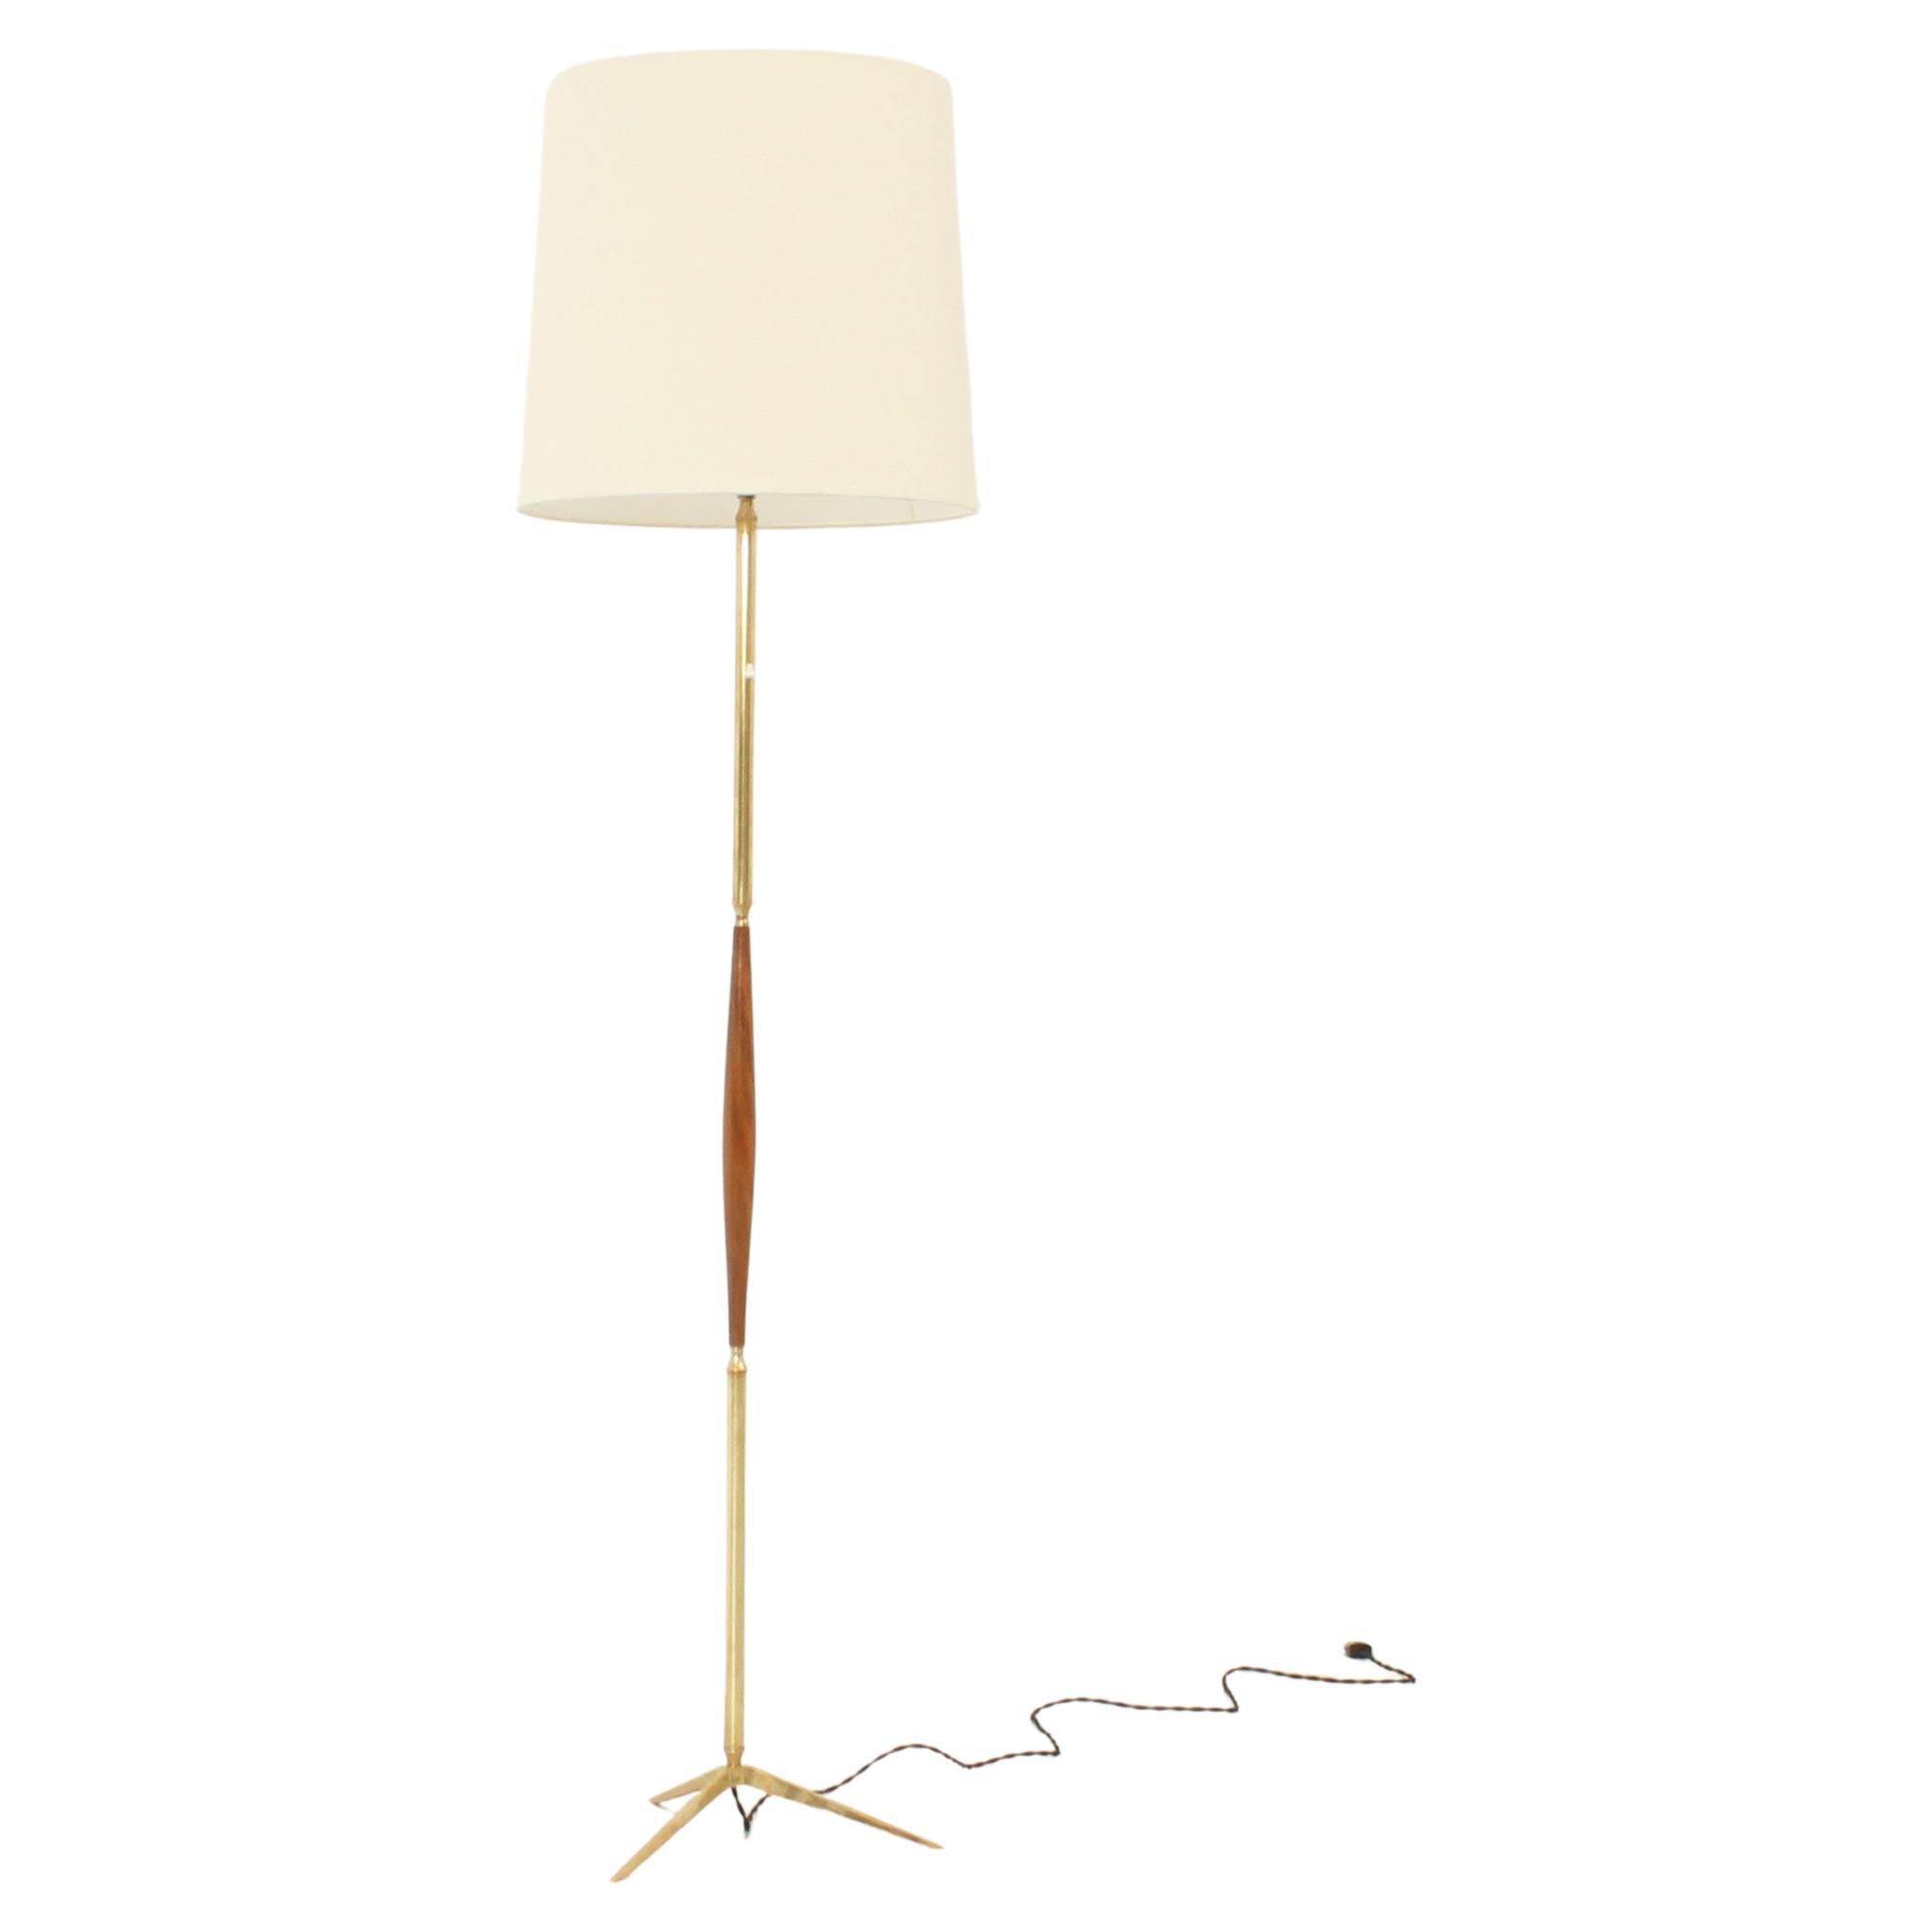 Spanish Floor Lamp in Brass and Walnut Wood from 1950s For Sale